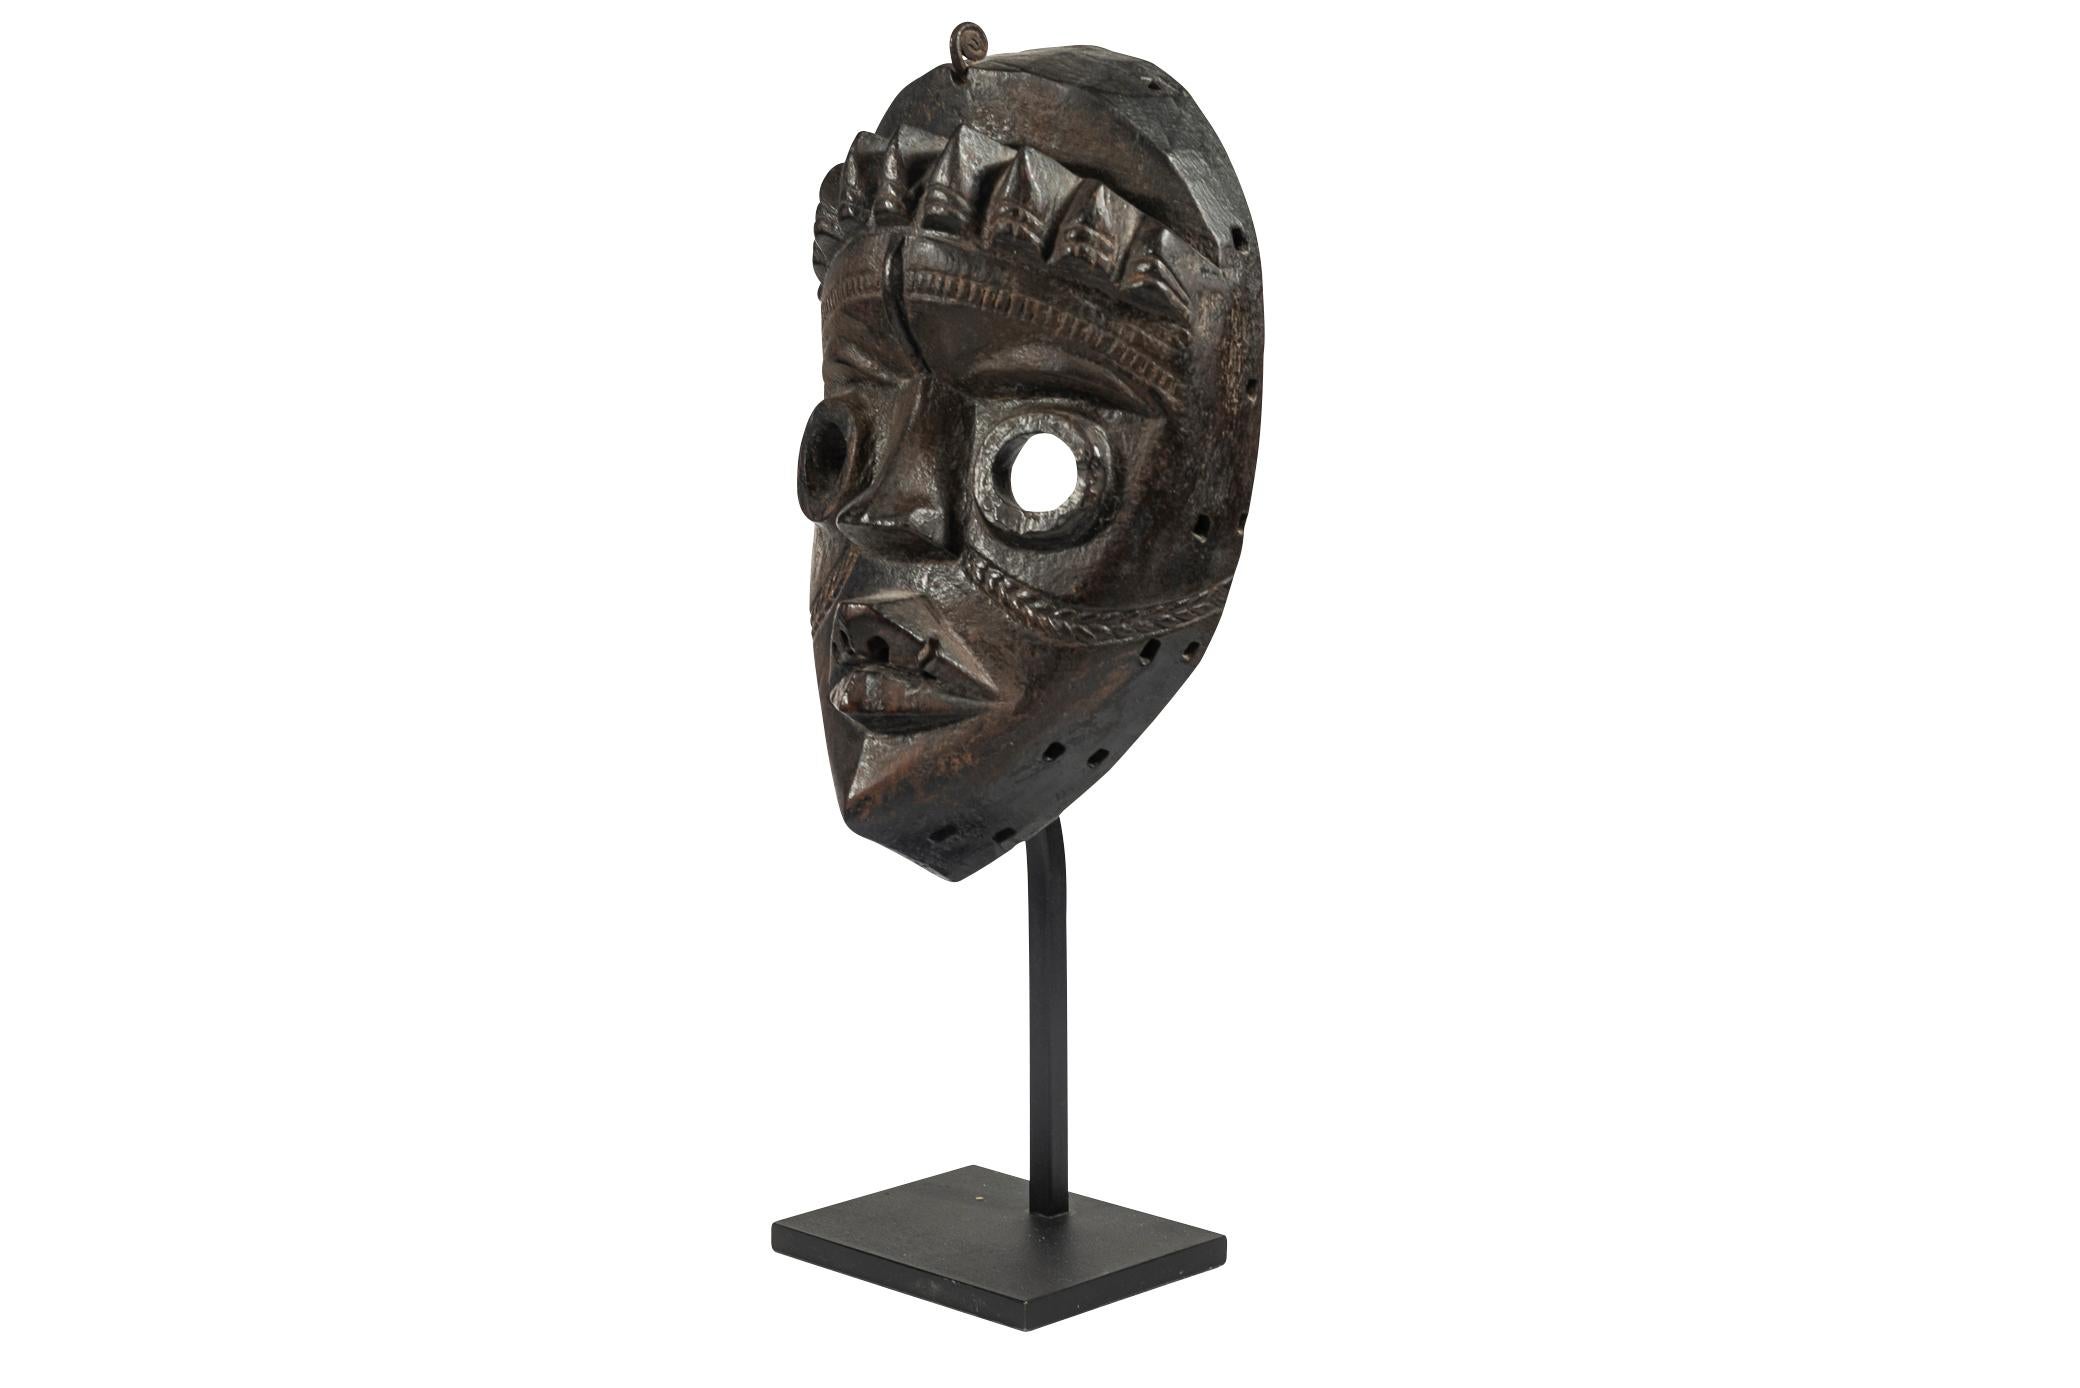 Dan-Toure, face mask,
Sculpted wood with brown patina,
Ivory coast, Dan culture, late 19th-early 20th century.

Measures: Height 22 cm, width 14 cm, depth 6 cm.

Provenance: Collection Marceau Rivière, Paris.

The Dan ethnic group is located in the